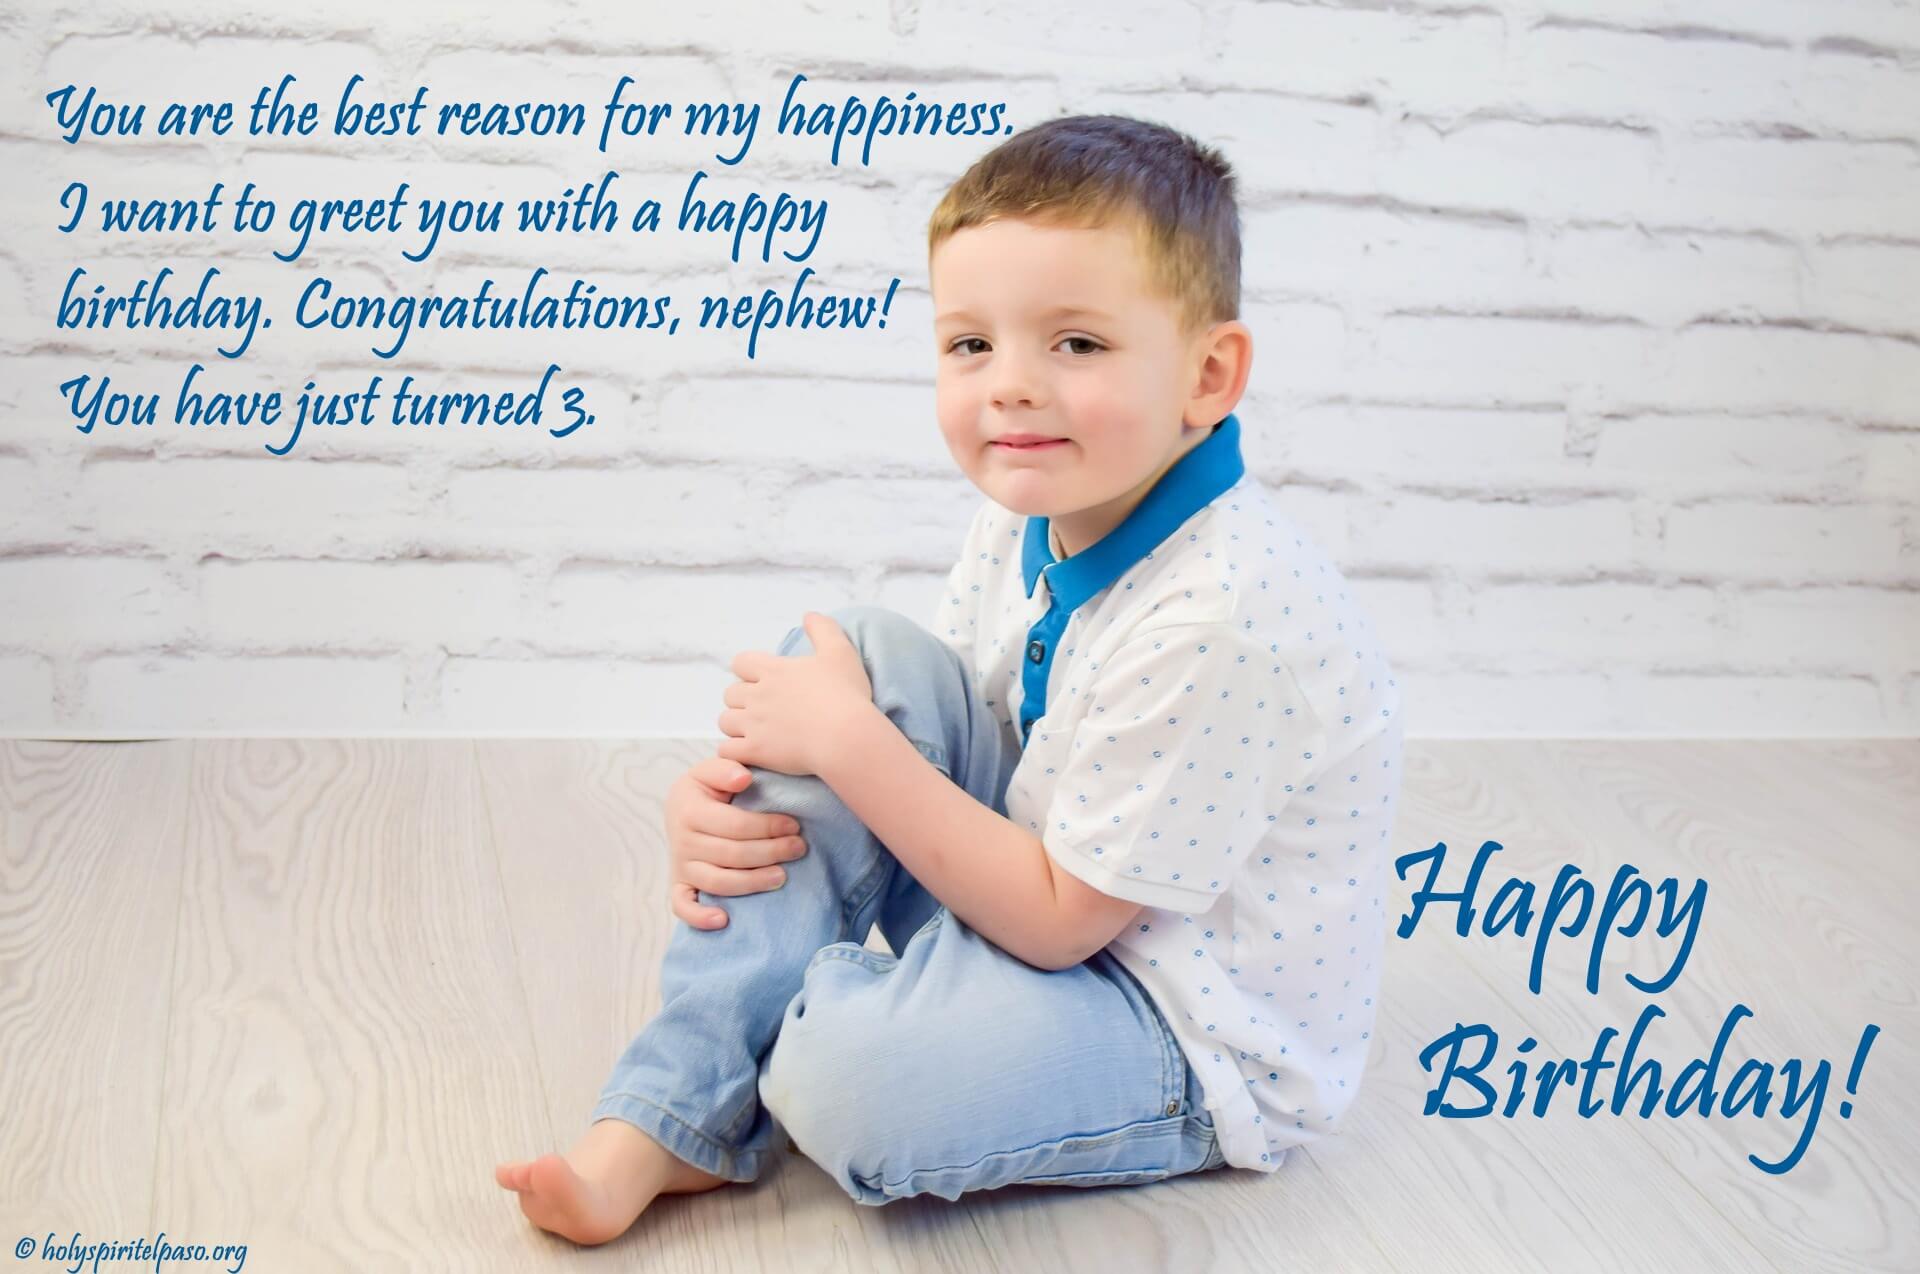 3rd Birthday Wishes - Happy 3rd Birthday Quotes & Messages